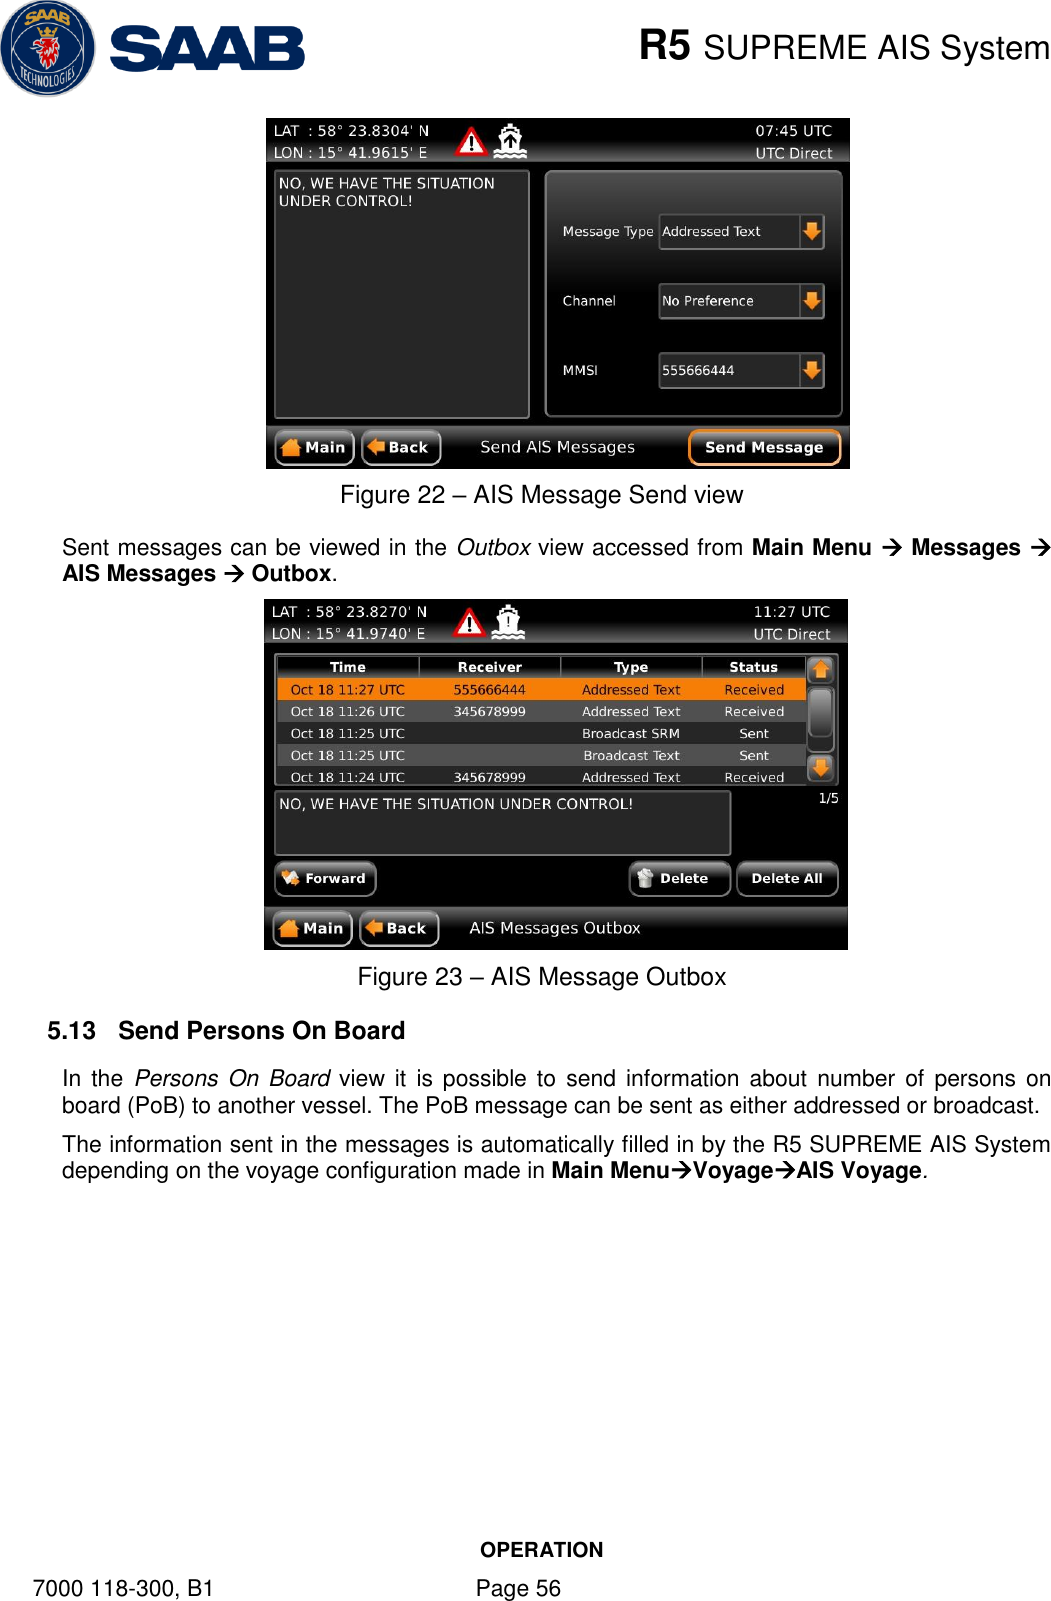    R5 SUPREME AIS System OPERATION 7000 118-300, B1    Page 56  Figure 22 – AIS Message Send view Sent messages can be viewed in the Outbox view accessed from Main Menu  Messages  AIS Messages  Outbox.  Figure 23 – AIS Message Outbox 5.13  Send Persons On Board In  the Persons On  Board  view it  is possible  to send  information about  number  of  persons on board (PoB) to another vessel. The PoB message can be sent as either addressed or broadcast.  The information sent in the messages is automatically filled in by the R5 SUPREME AIS System depending on the voyage configuration made in Main MenuVoyageAIS Voyage.  